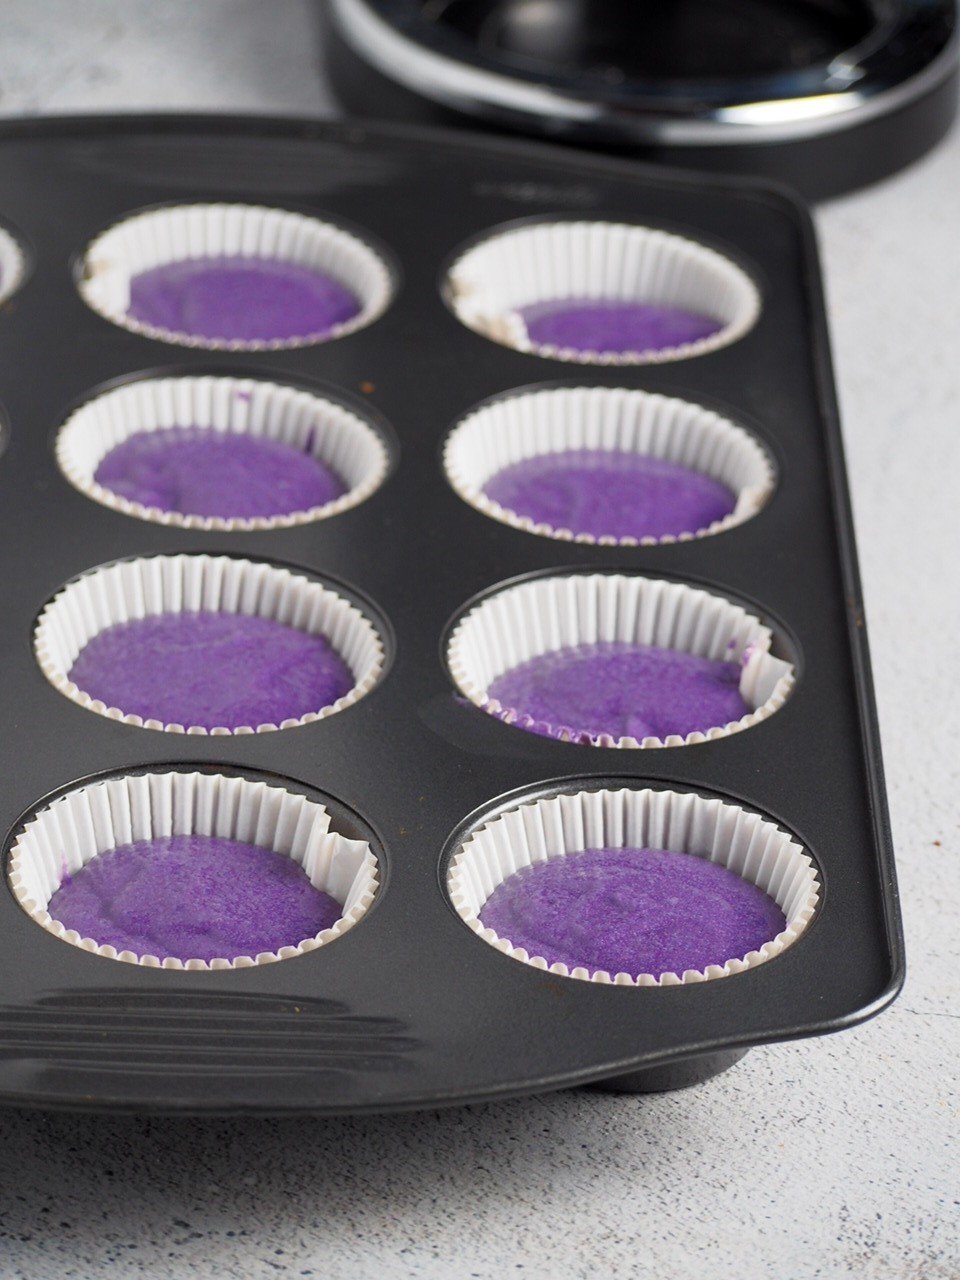 The ube cupcakes ready for the oven.